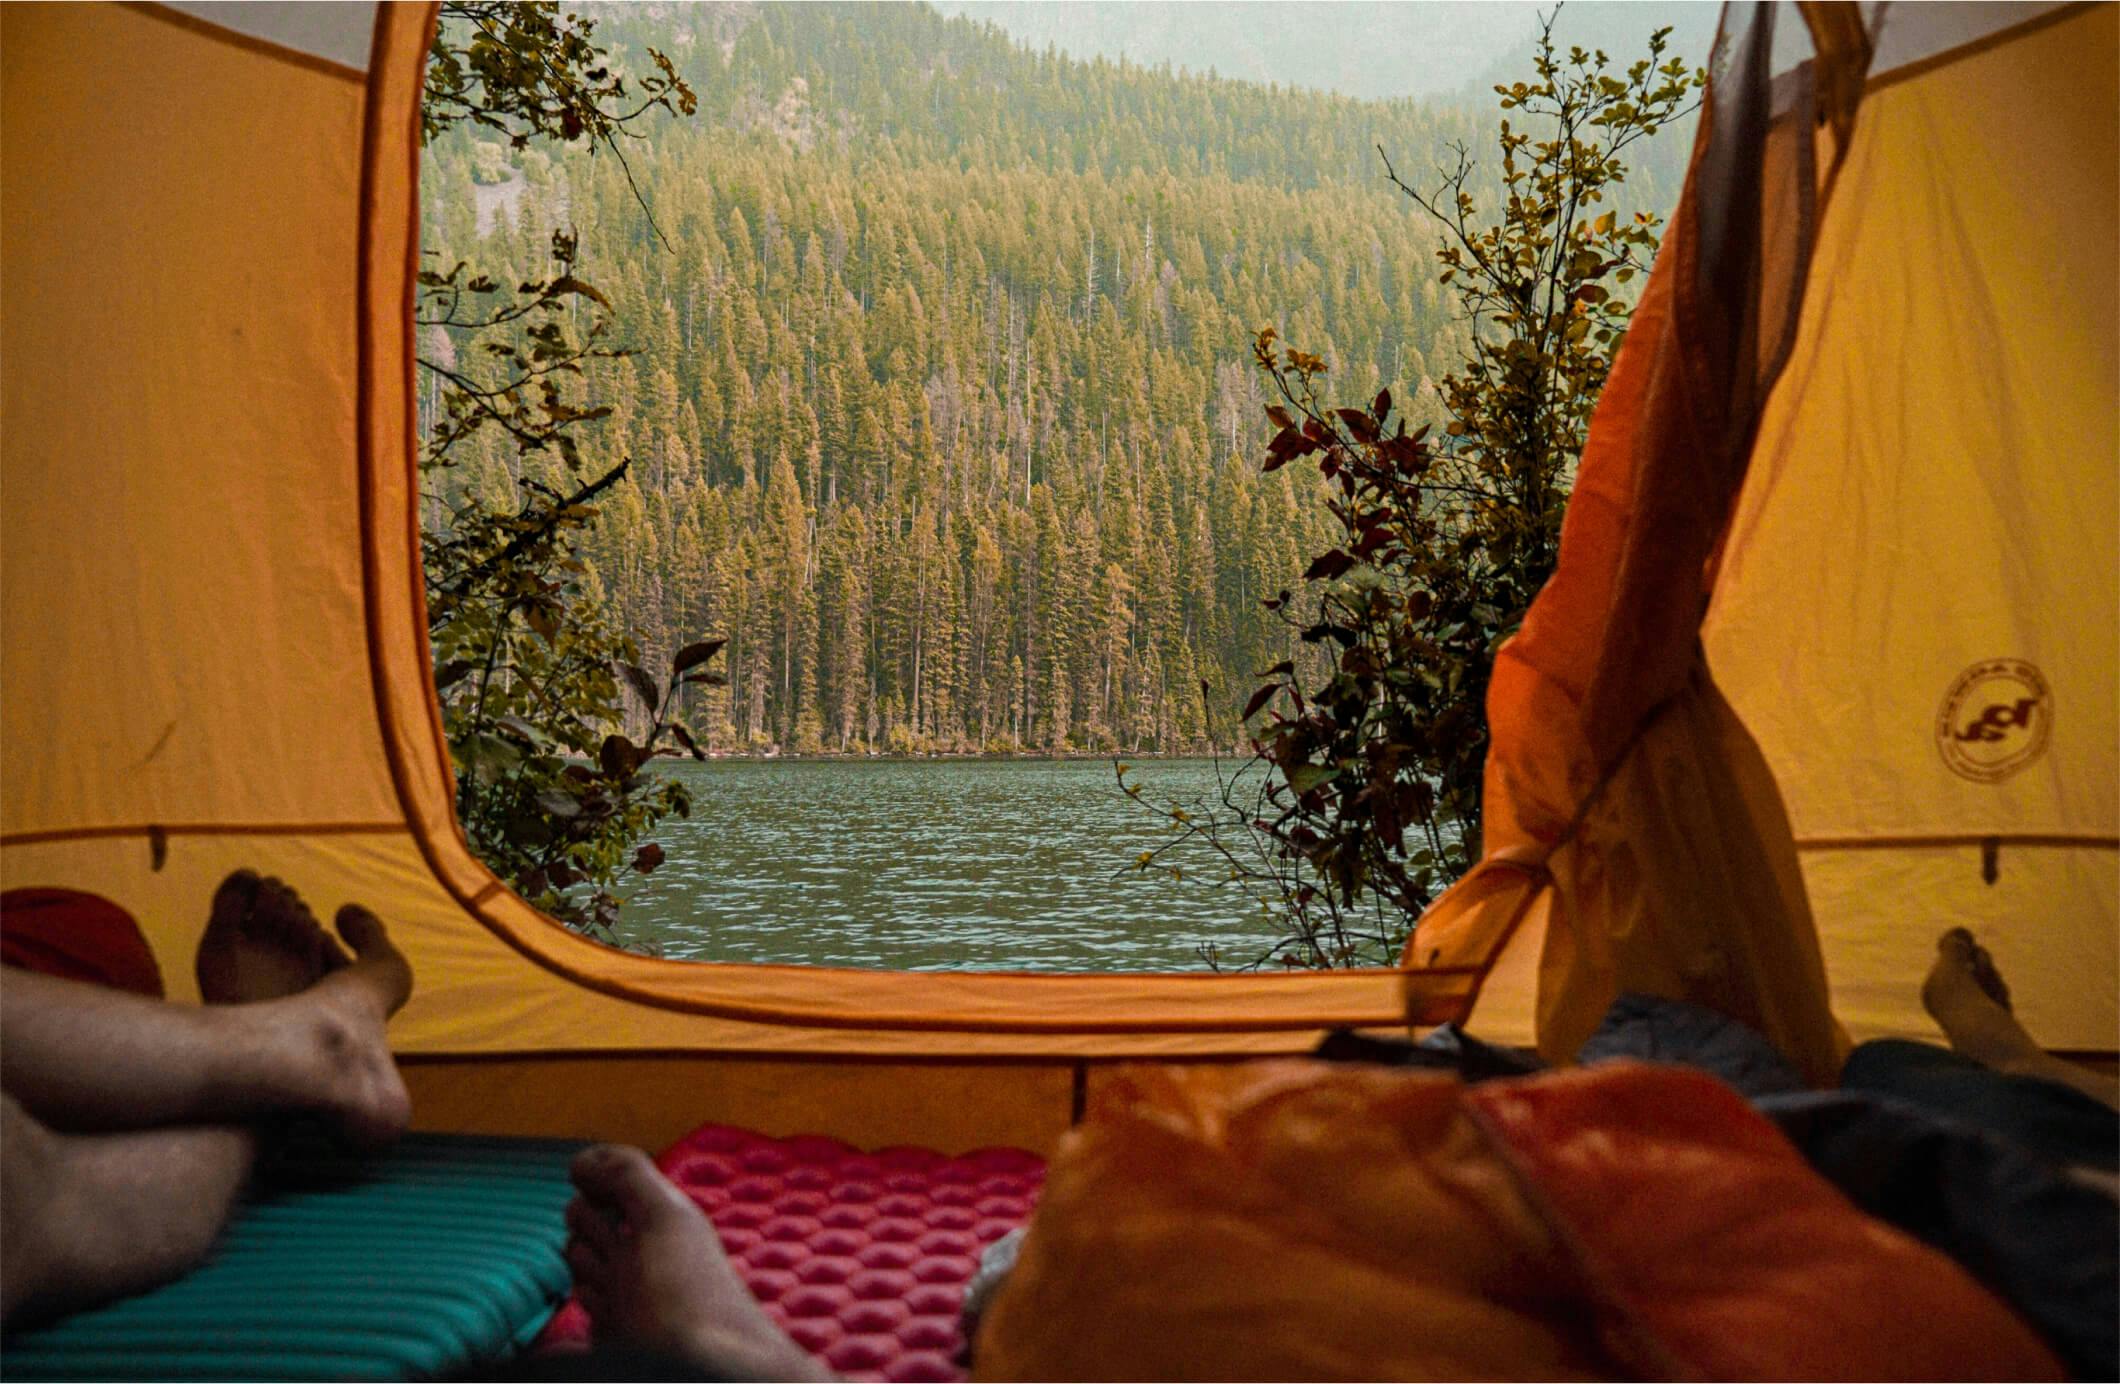 Forest view from inside of a tent